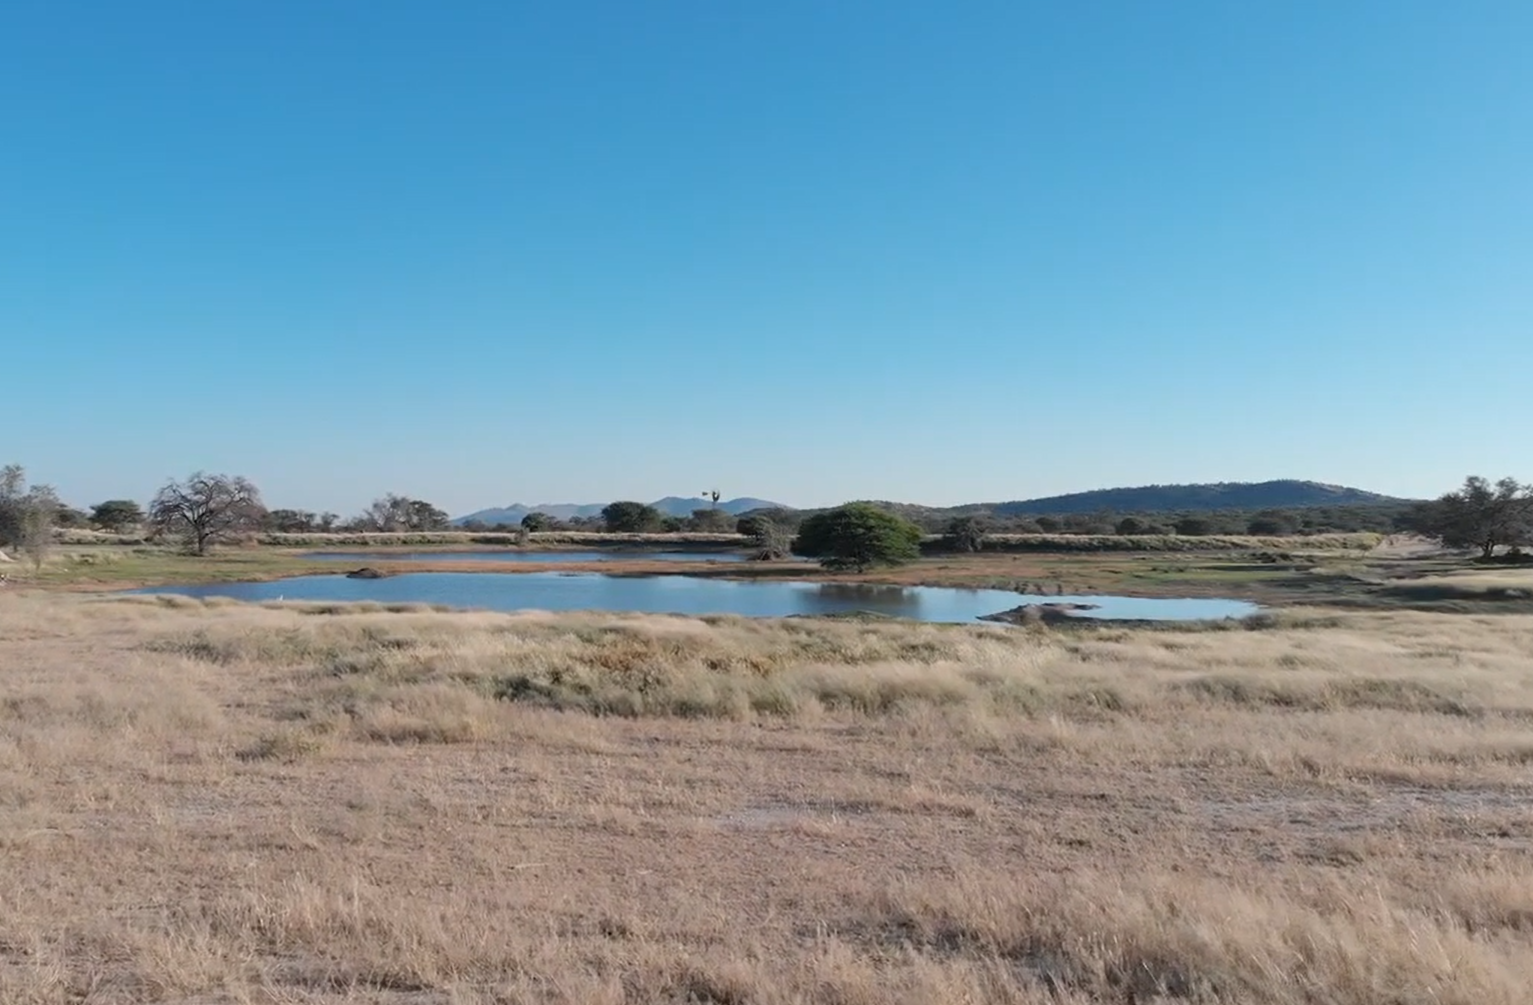 Ecosystem Services project in Namibia